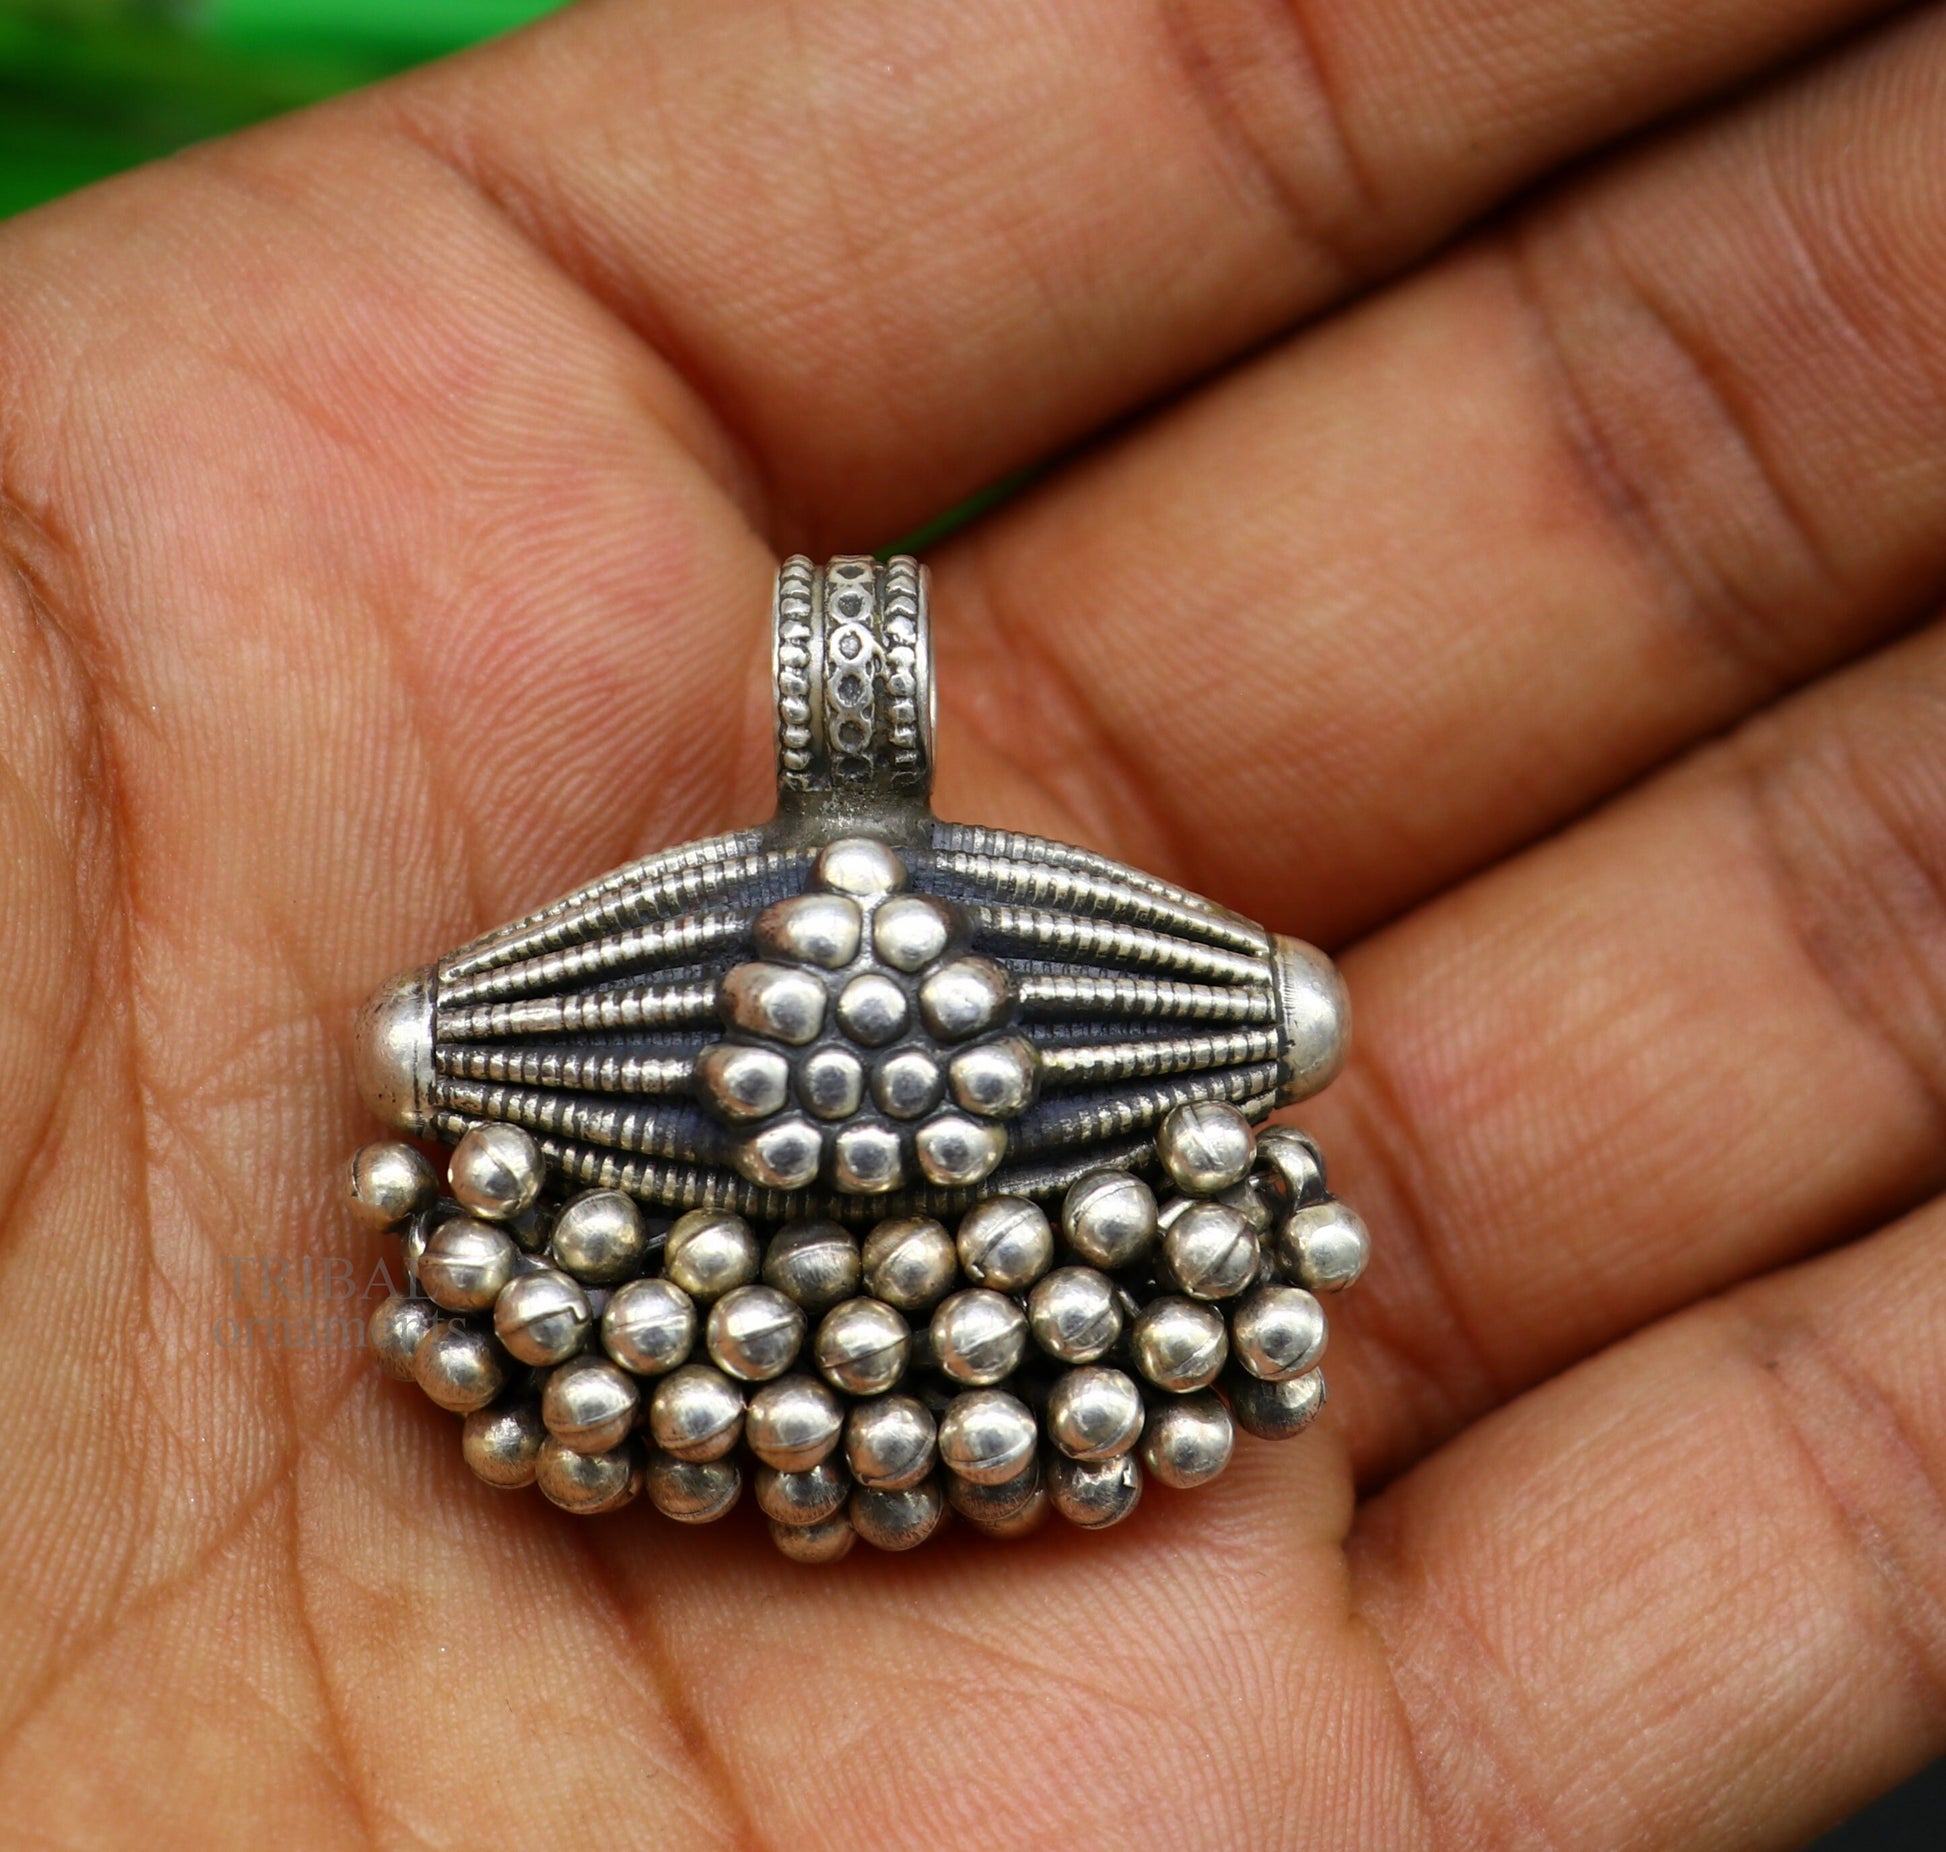 925 sterling silver handmade pendant locket vintage amulet design amulet pendant with gorgeous hanging drops tribal ethnic jewelry ssp1528 - TRIBAL ORNAMENTS